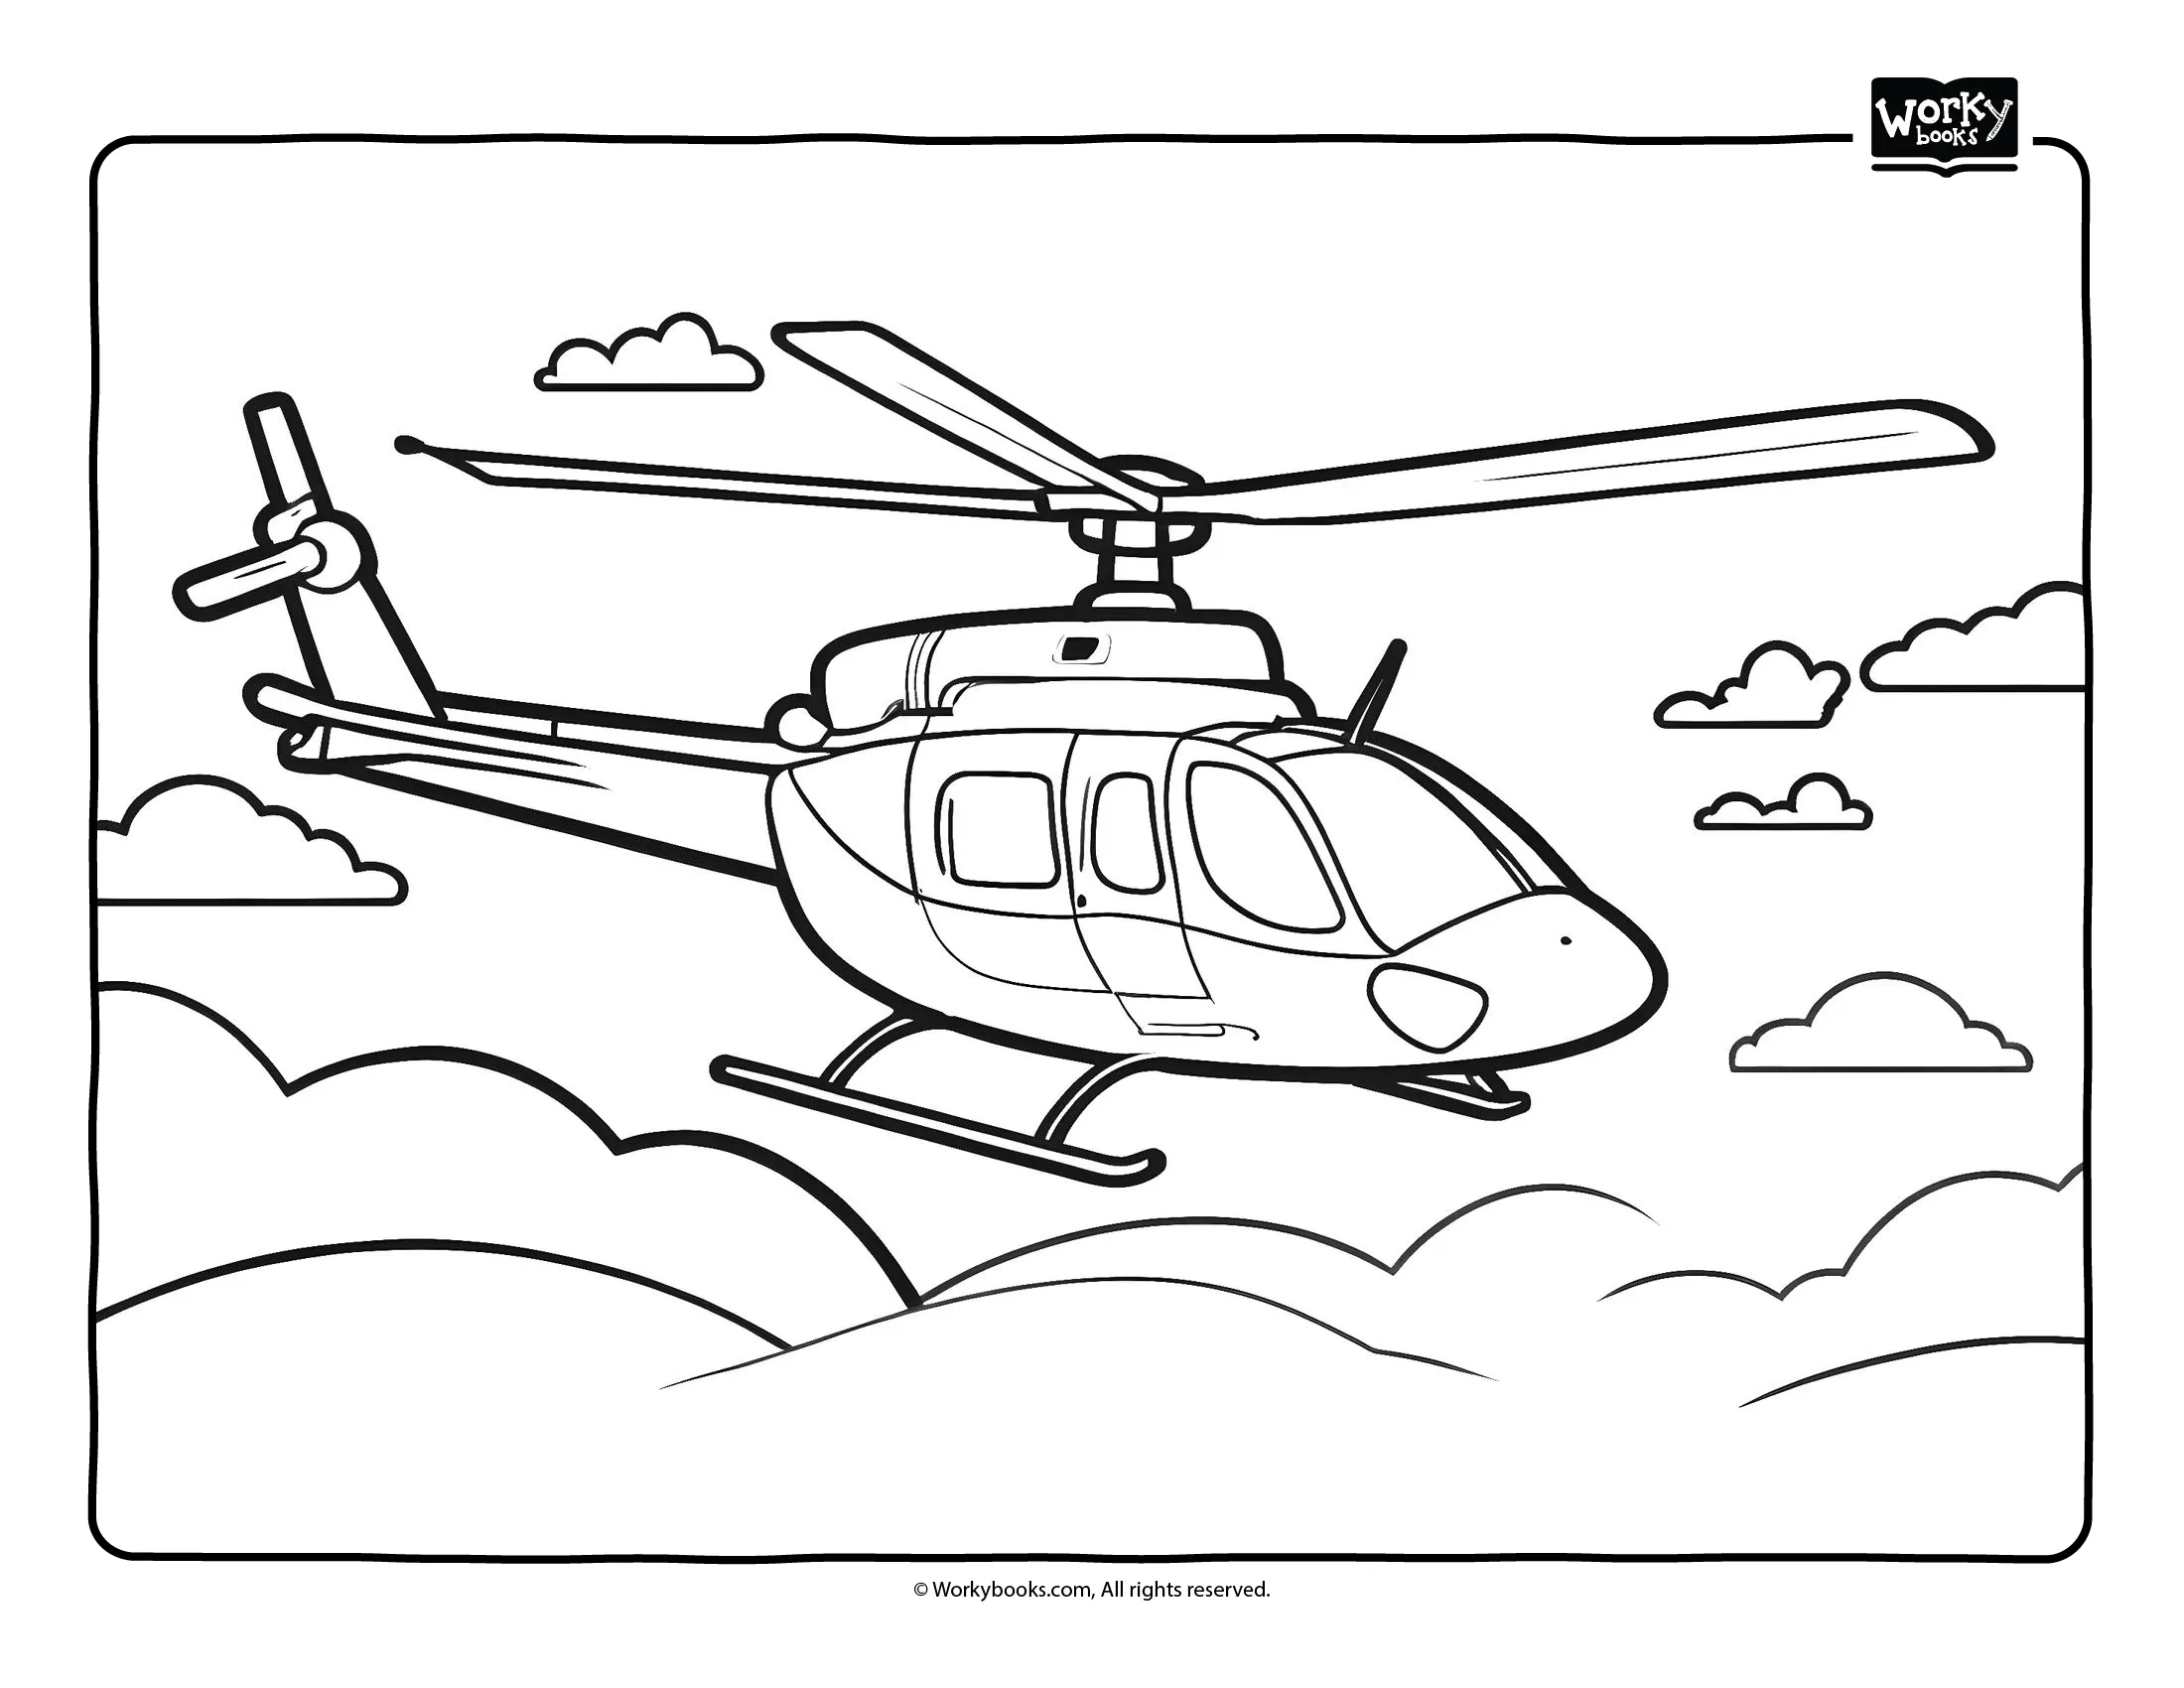 Helicopter Coloring pages
